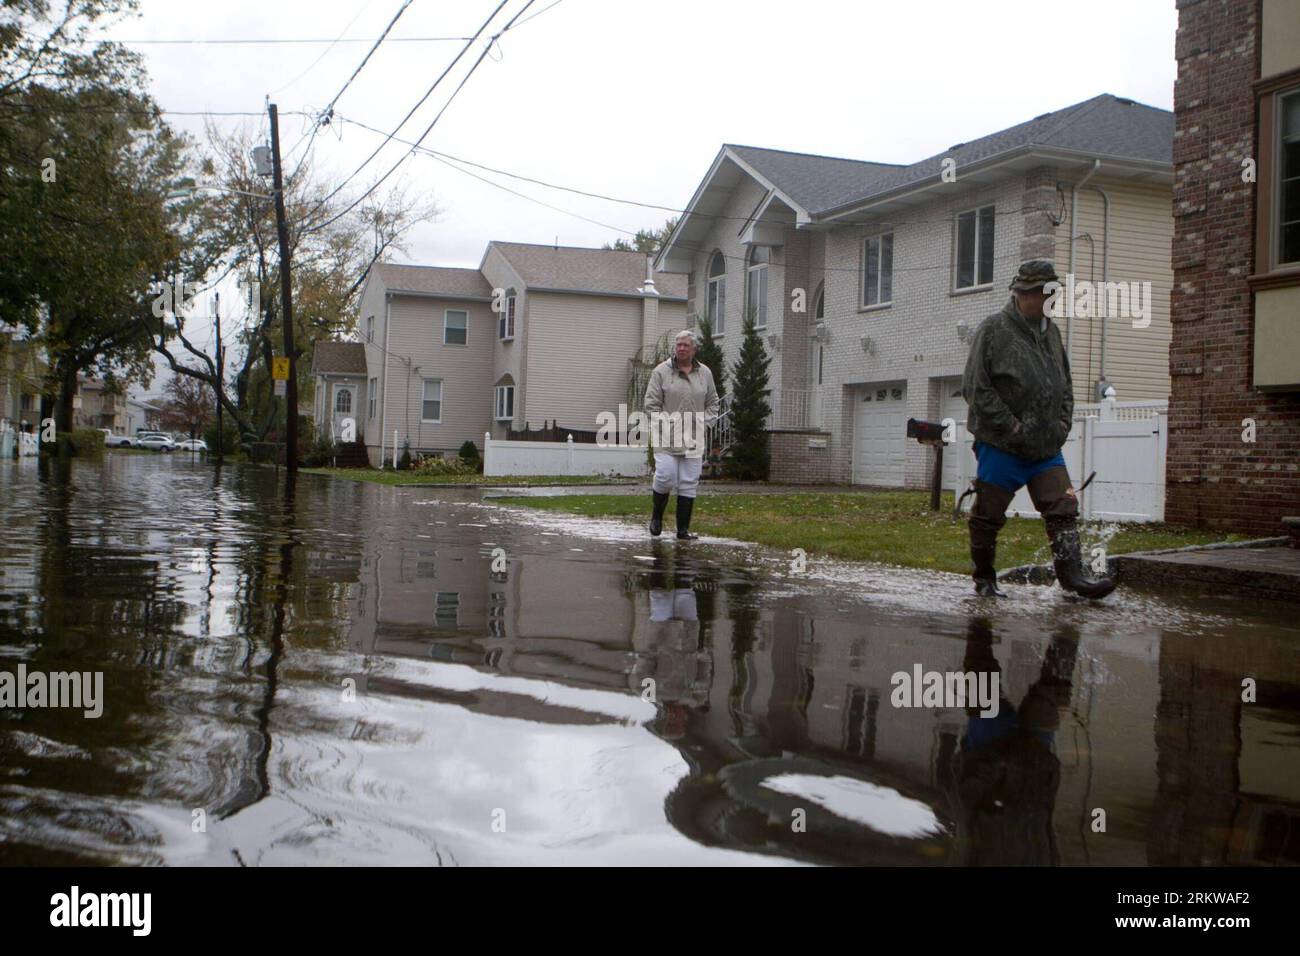 Bildnummer: 58651237  Datum: 30.10.2012  Copyright: imago/Xinhua NEW JERSEY, Oct. 30, 2012 - Two residents survey the flooding damage near their house after Hurricane Sandy in the Bergen County town of Moonachie, New Jersey, the United States, Oct. 30, 2012. (Xinhua/Marcus DiPaola)(rh) US-NEW JERSEY-HURRICANE-SANDY PUBLICATIONxNOTxINxCHN Gesellschaft USA Katastrophe Sturm Wirbelsturm Hurrikan Wetter Unwetter Naturkatastrophe Sturm Hurrikan USA Wirbelsturm x0x xmb 2012 quer     58651237 Date 30 10 2012 Copyright Imago XINHUA New Jersey OCT 30 2012 Two Residents Survey The flooding Damage Near t Stock Photo